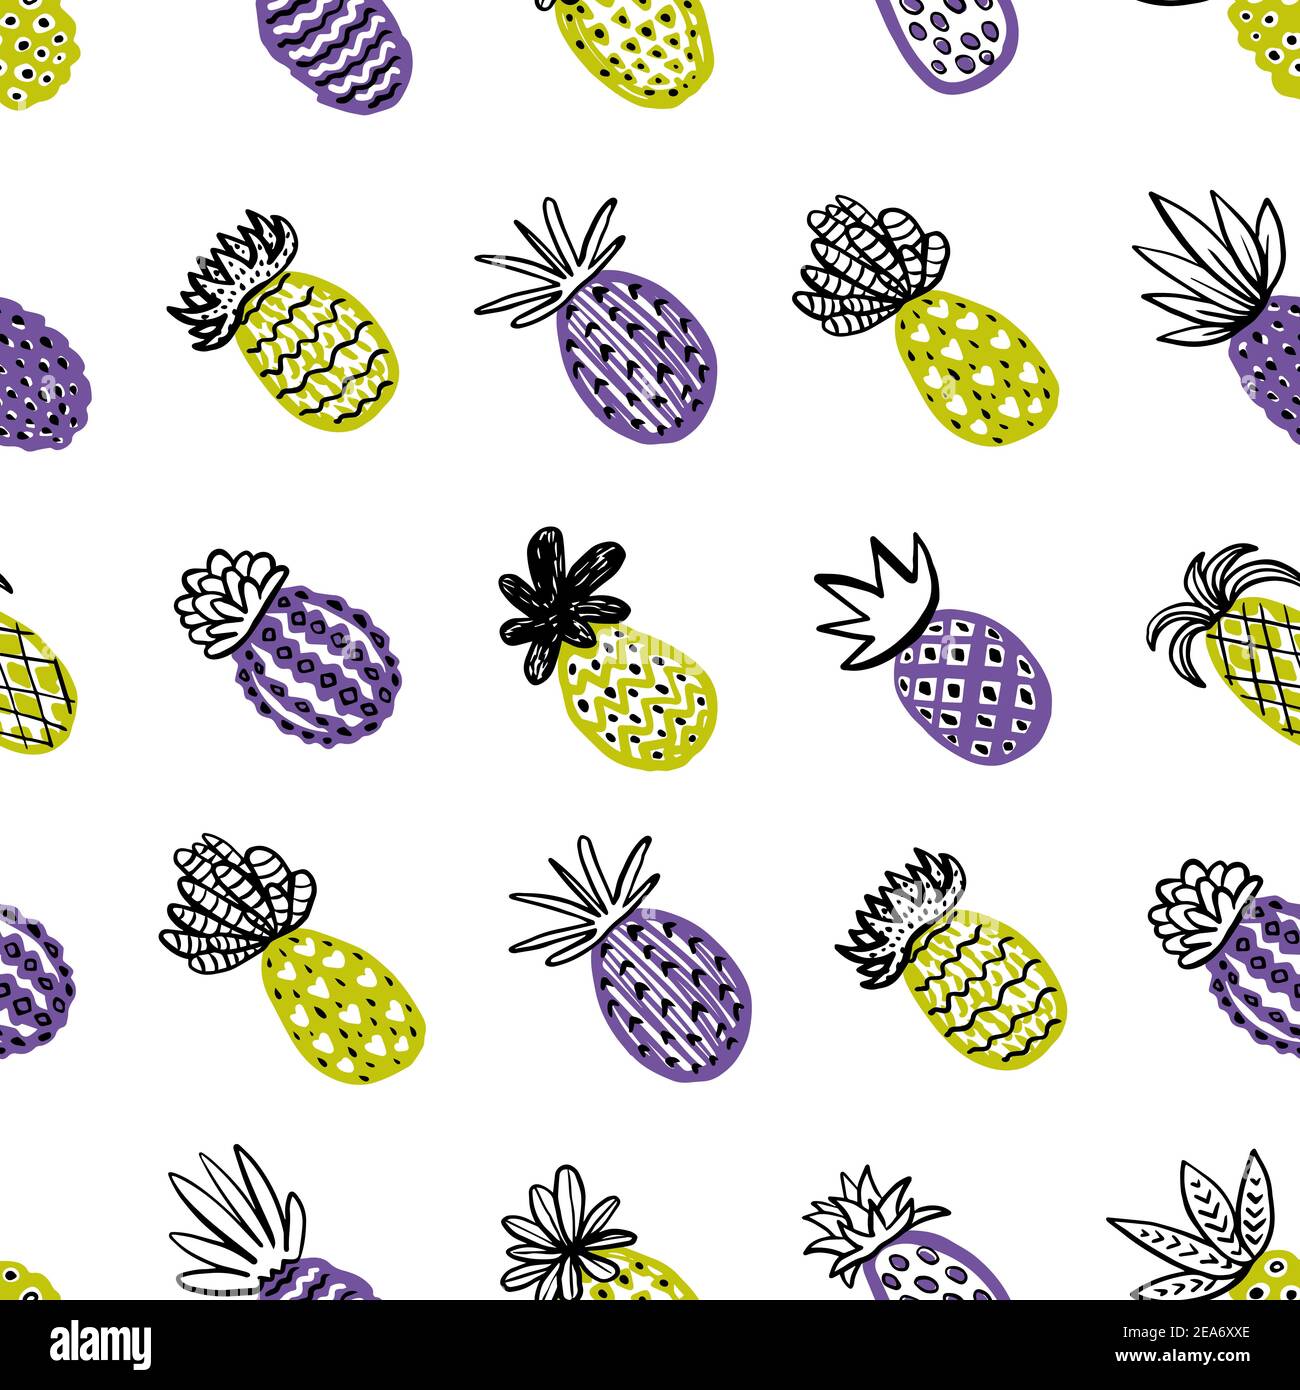 Seamless pineapple pattern. Handdrawn Pinapple with different textures in pastel colors. Exotic fruits background For Fashion print, textile, fabric Stock Vector